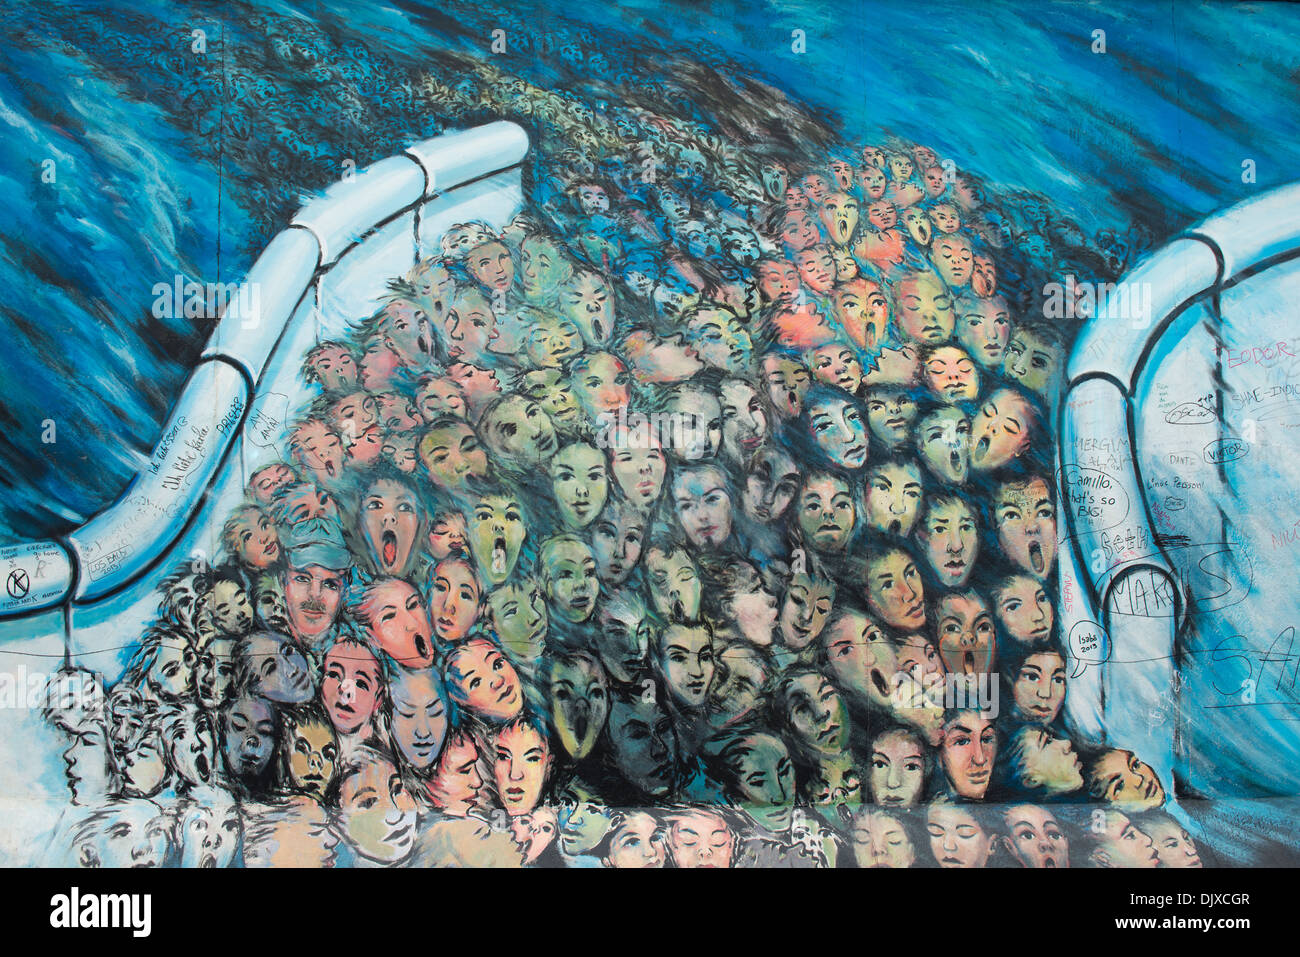 Graffiti art depicting people escaping East Berlin. Painted on the East Side Gallery, Berlin, Germany. Stock Photo